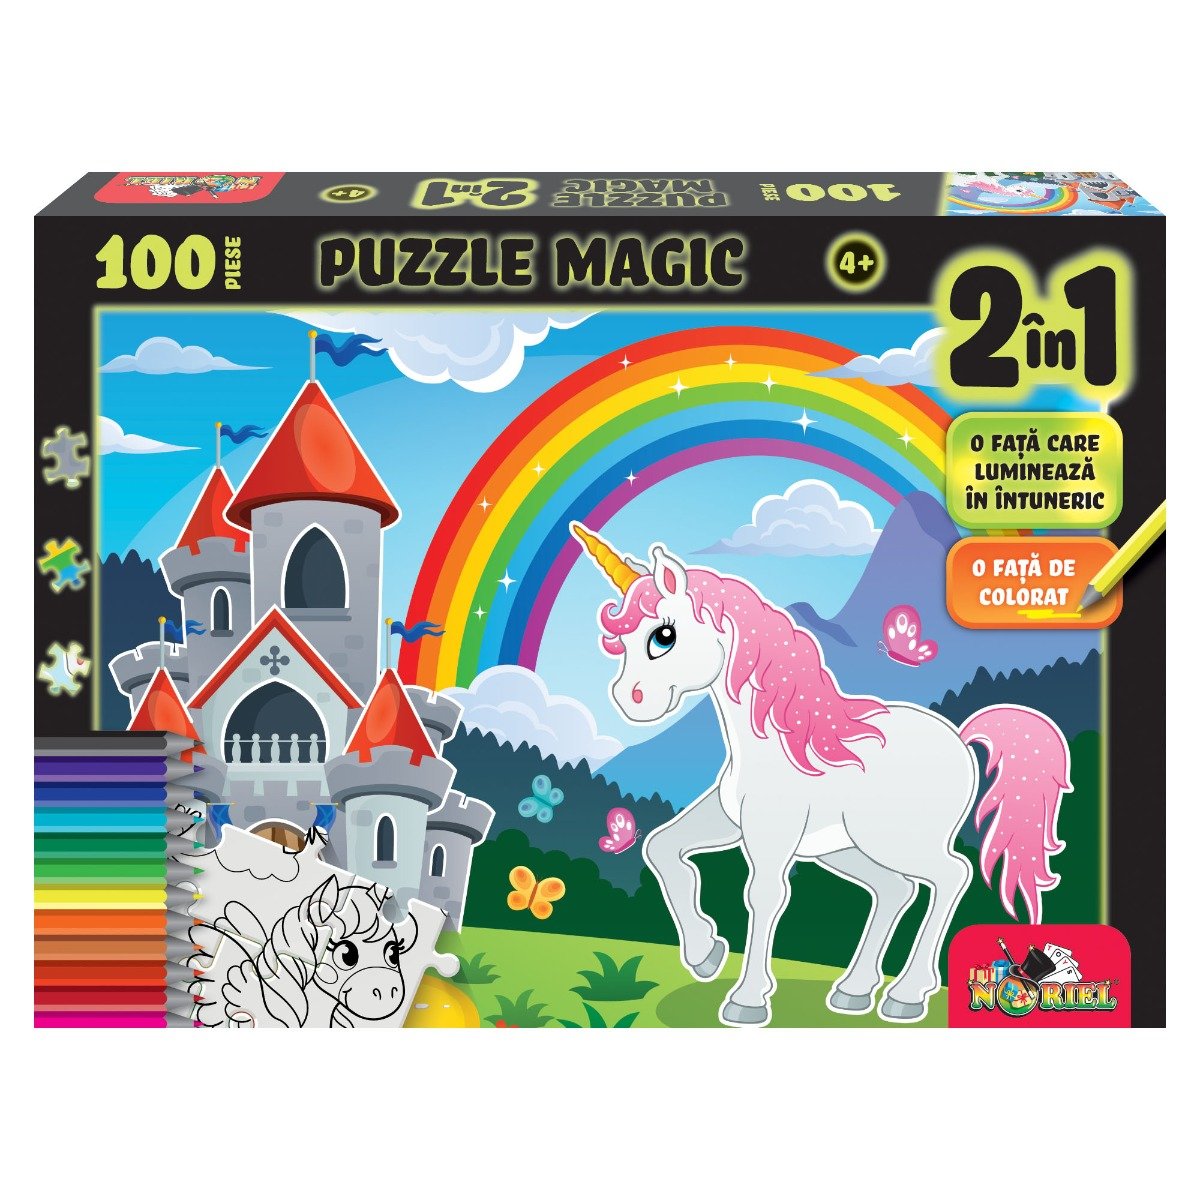 Puzzle Magic 2 in 1, Witty Puzzlezz, Unicorn, 100 piese Puzzle 2023-09-25